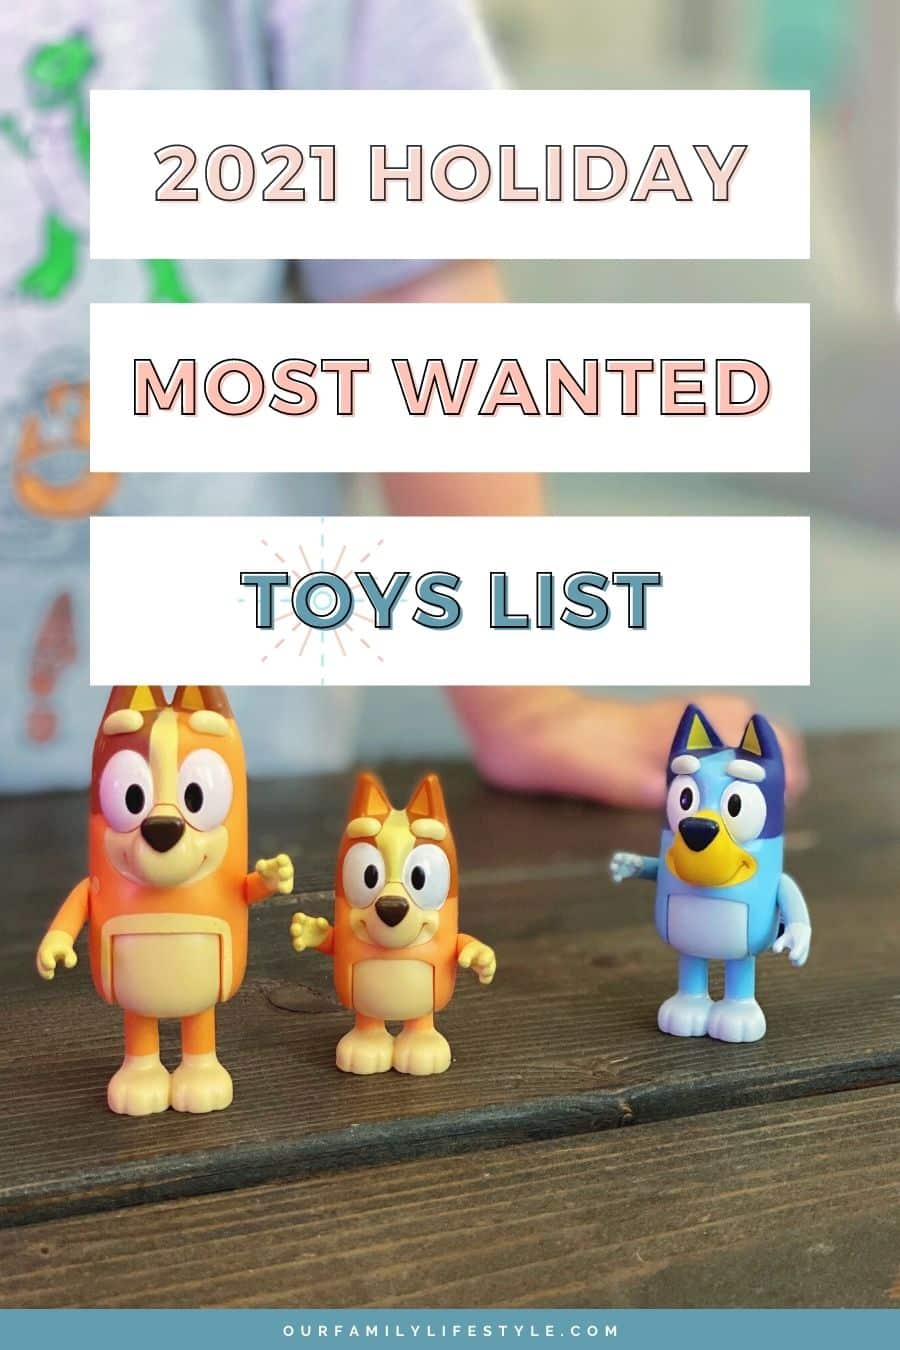 2021 Holiday Most Wanted Toys List